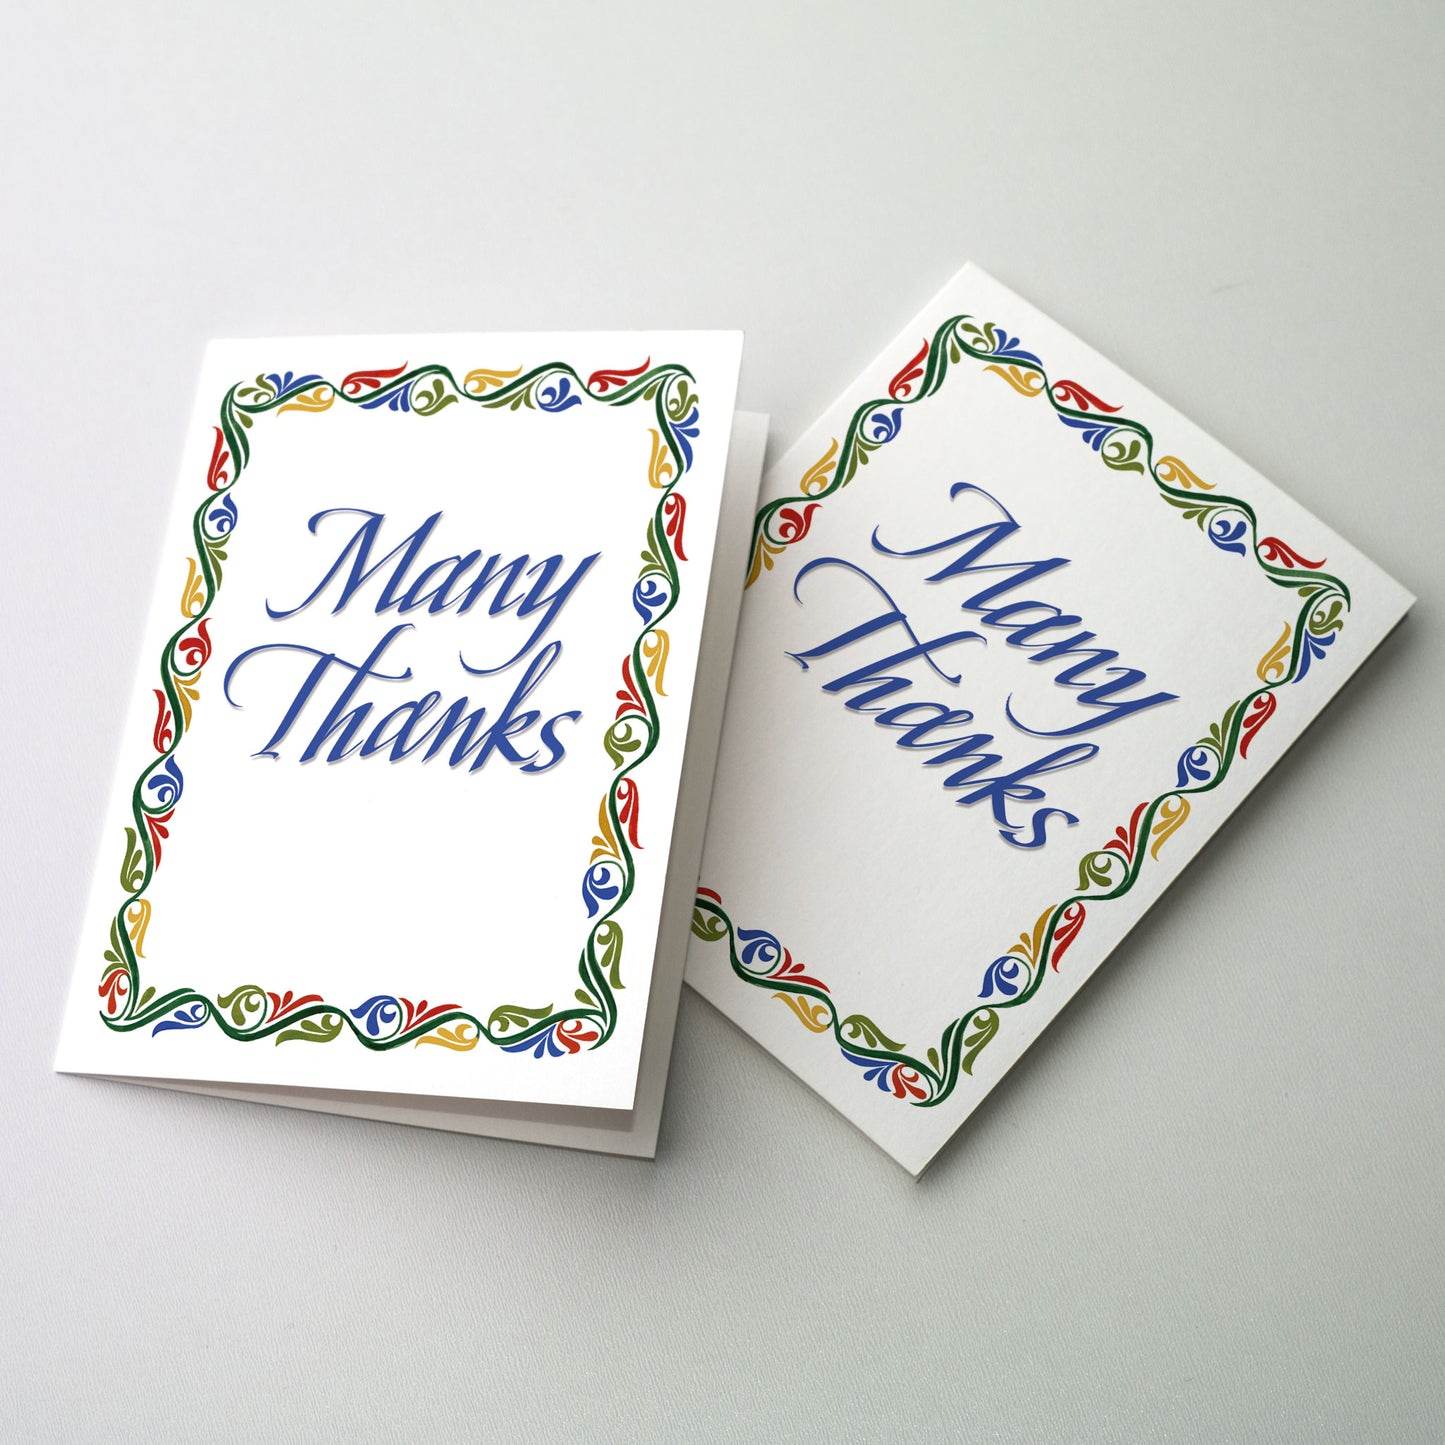 You Are a Blessing - Thank You Card